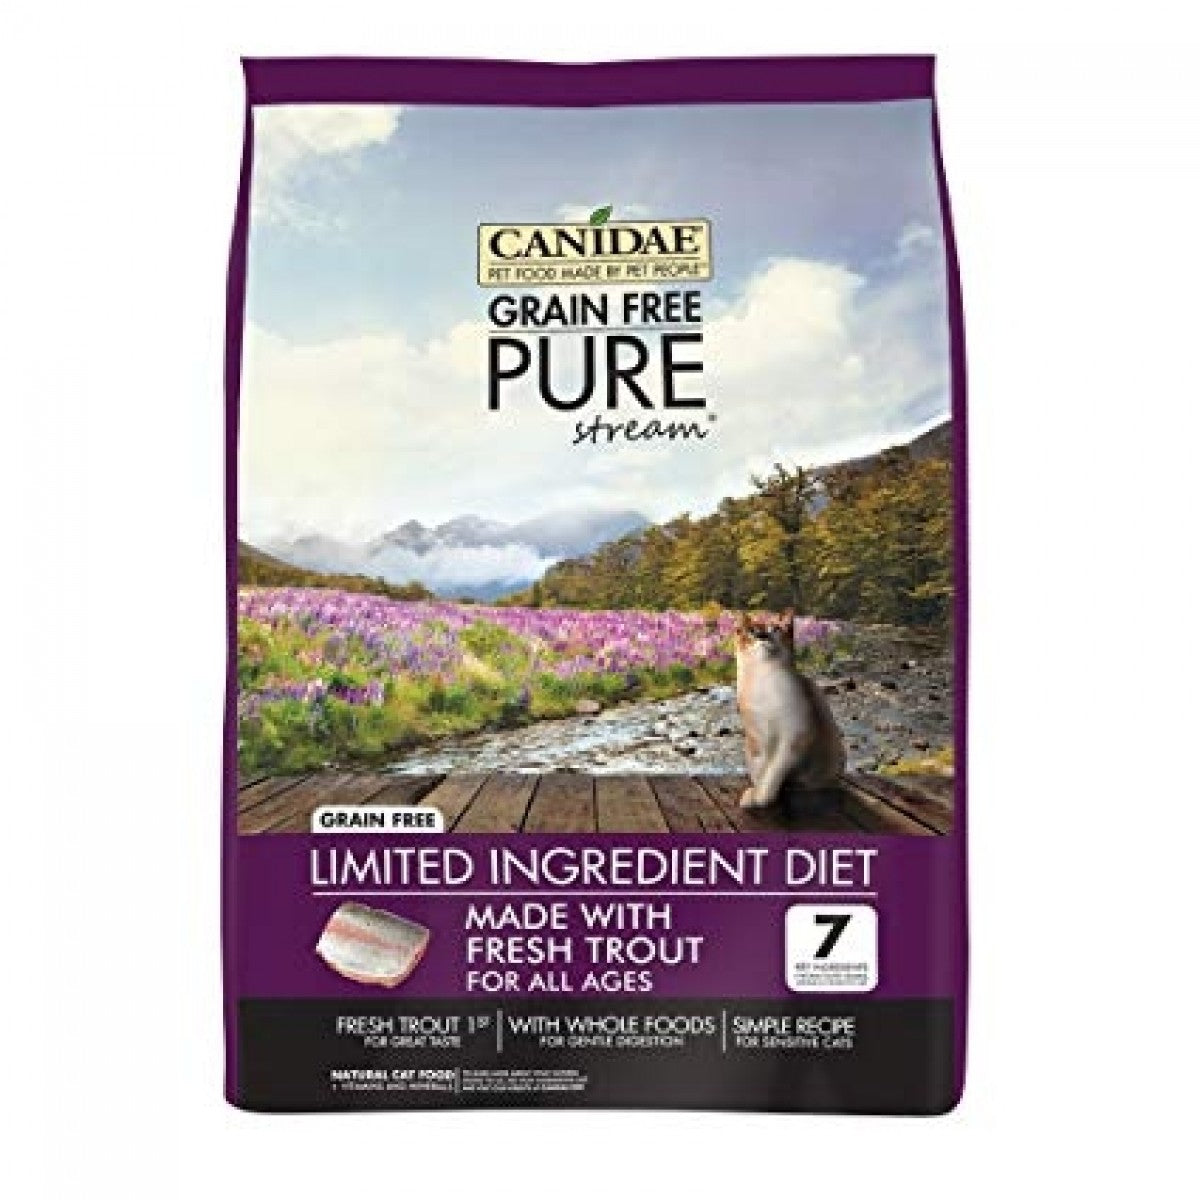 Canidae Grain Free PURE Stream Adult, Kitten & Senior Formula With Fresh Trout